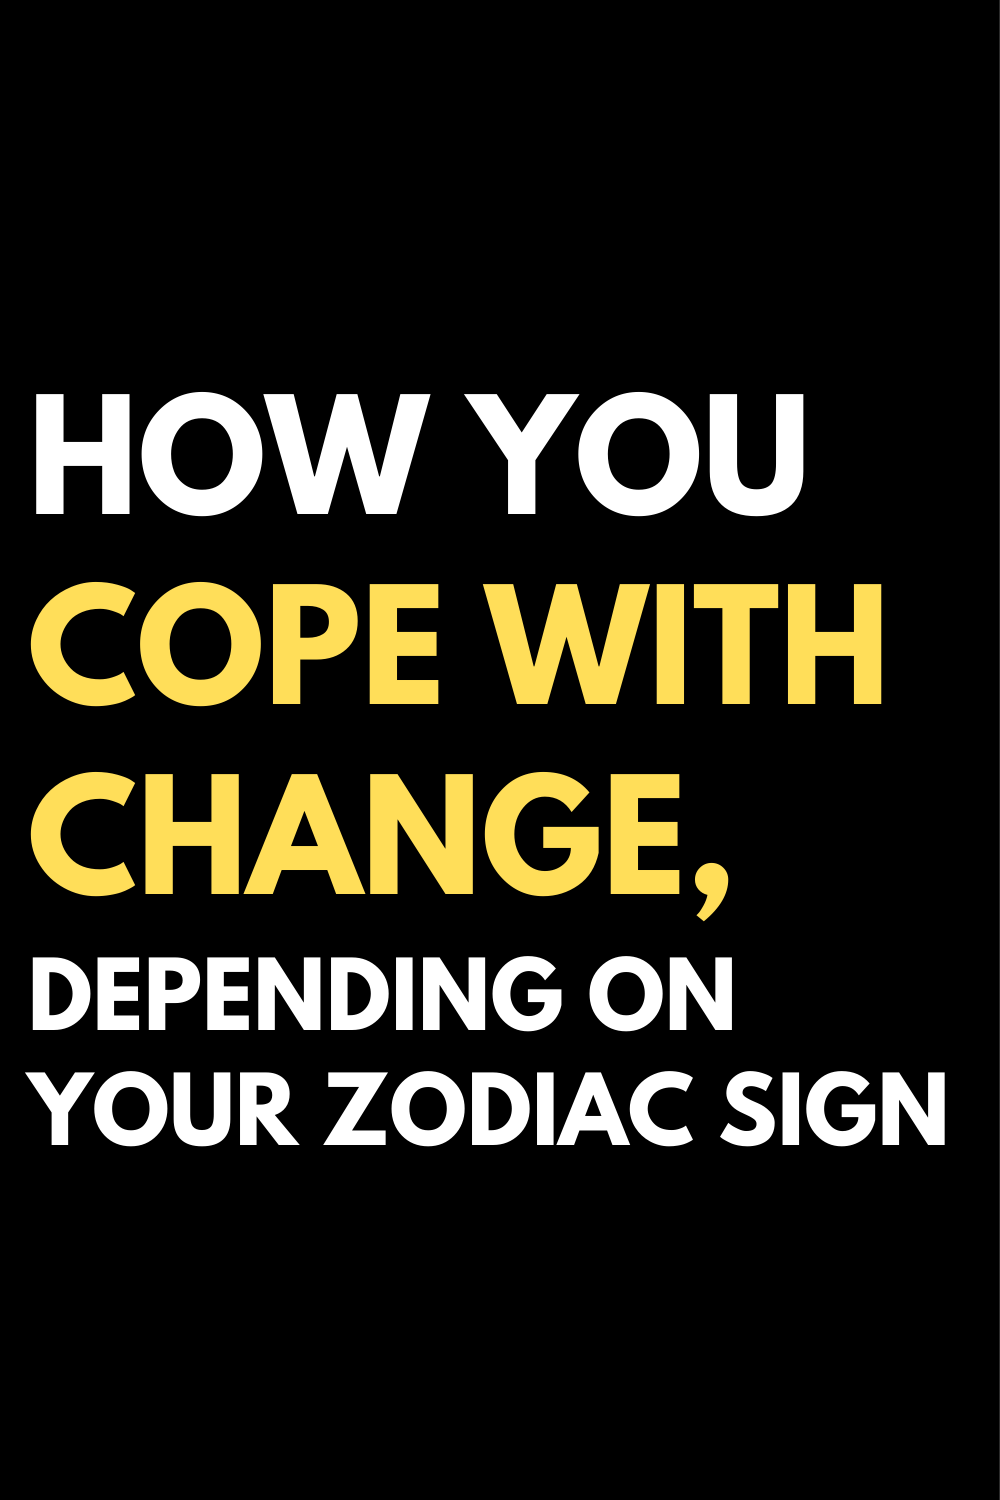 How you cope with change, depending on your zodiac sign